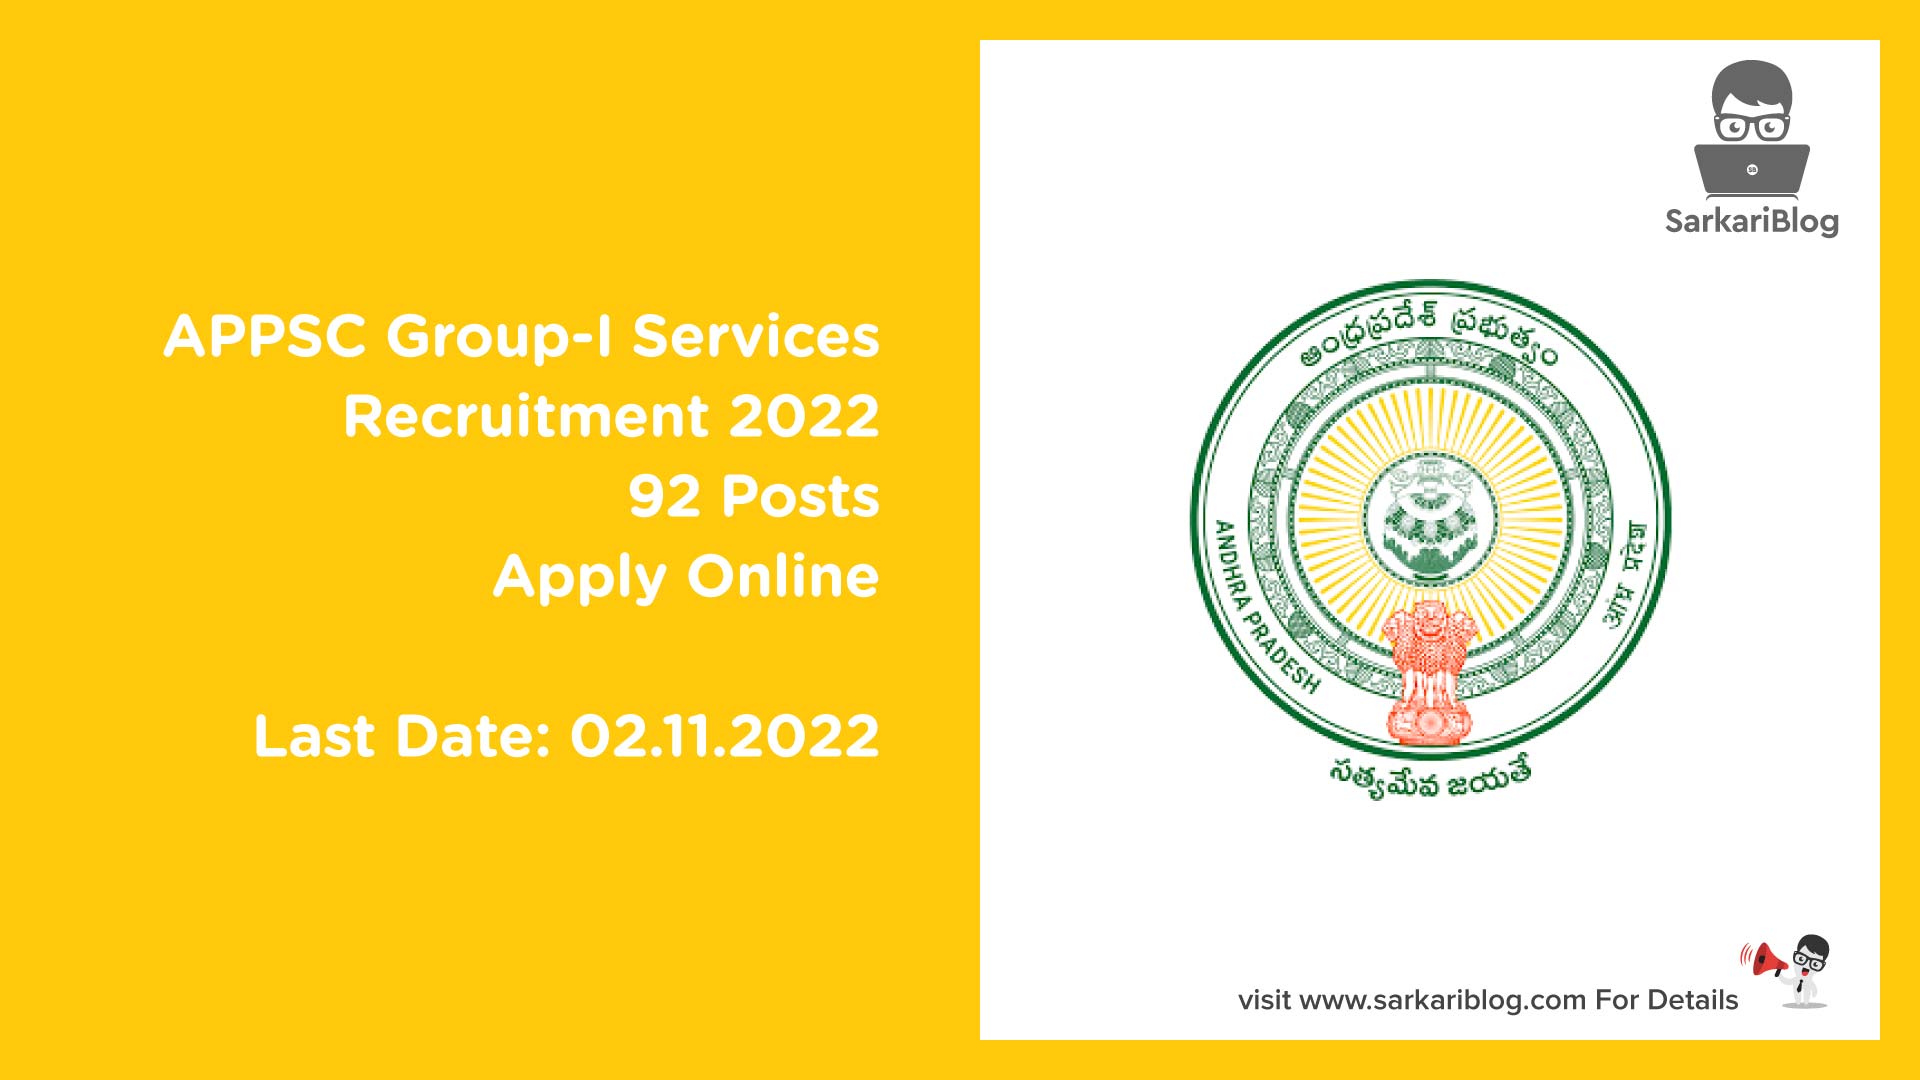 APPSC Group-I Services Recruitment 2022